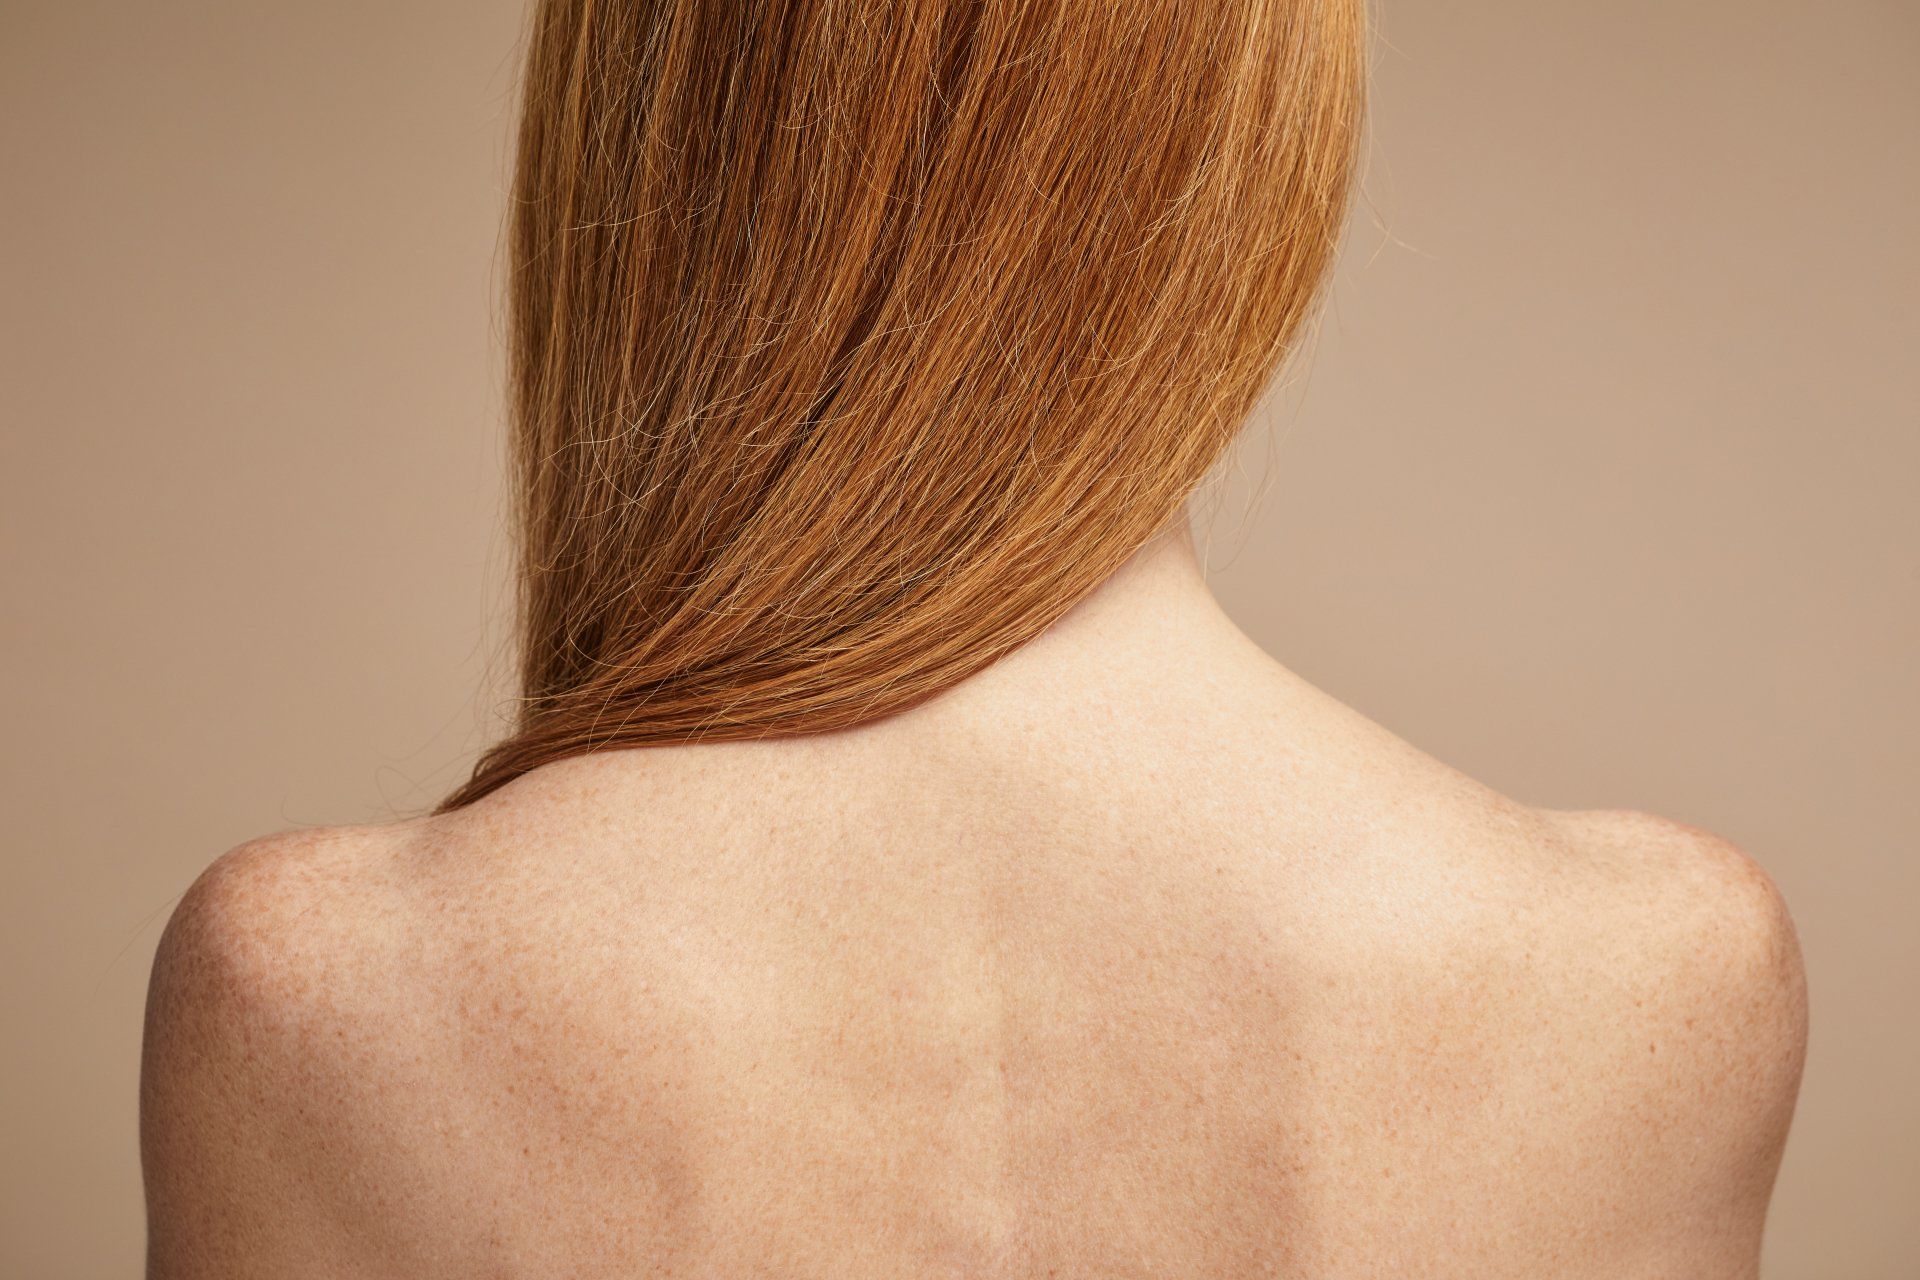 rear view of woman's shoulders and back and long hair